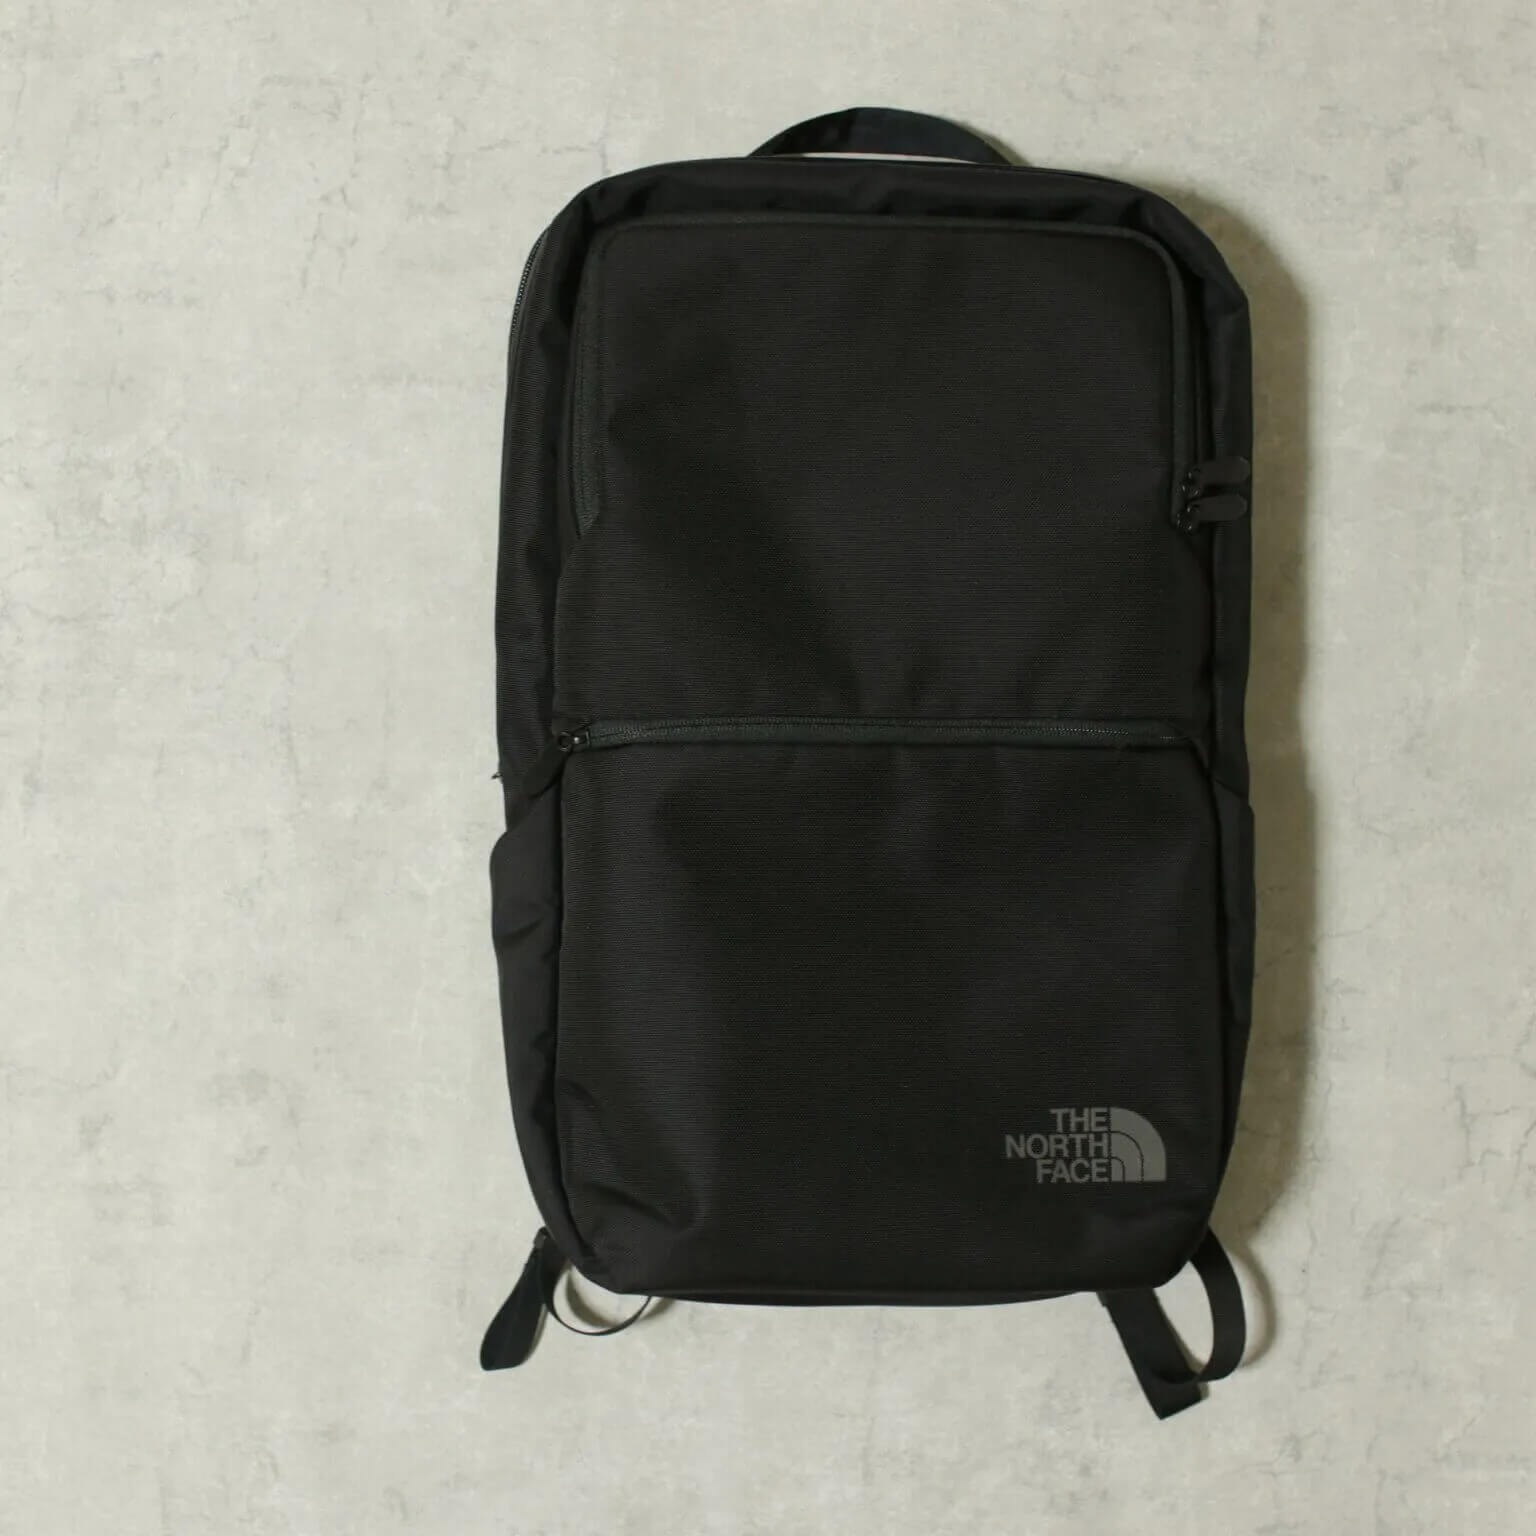 THE NORTH FACE・バッグ　バックパック シャトル 24.5L